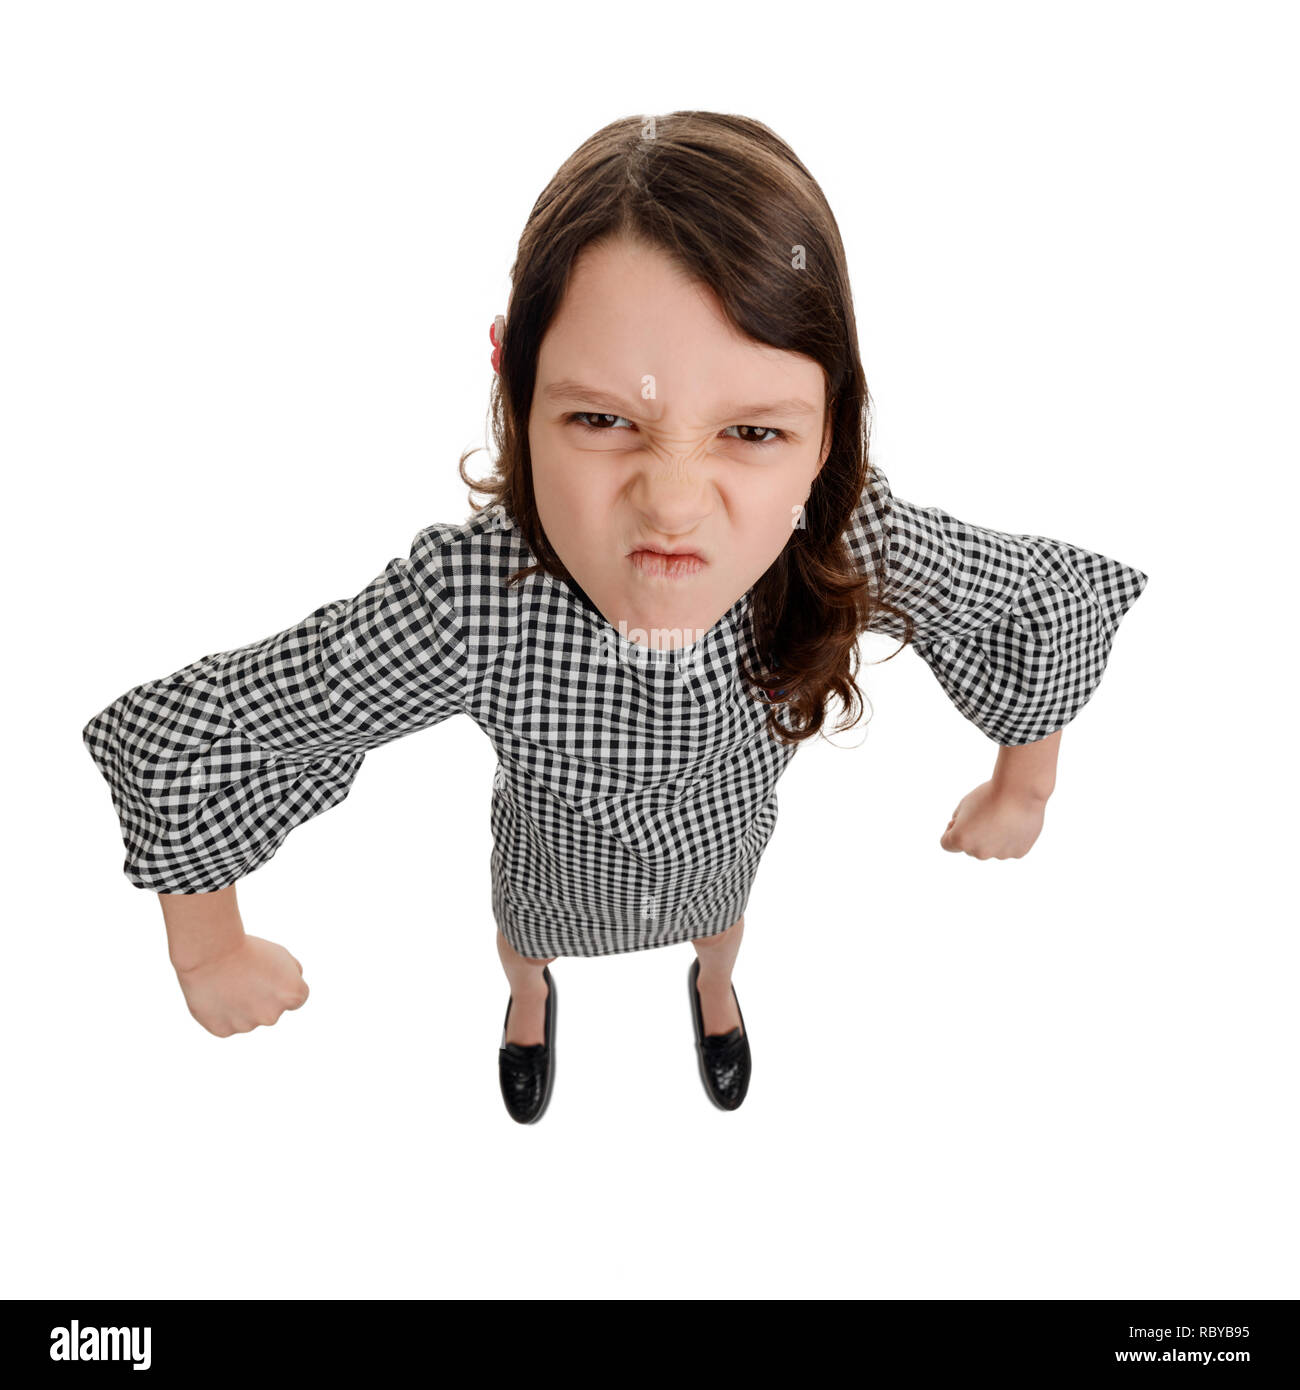 Angry kid with fists ready Stock Photo